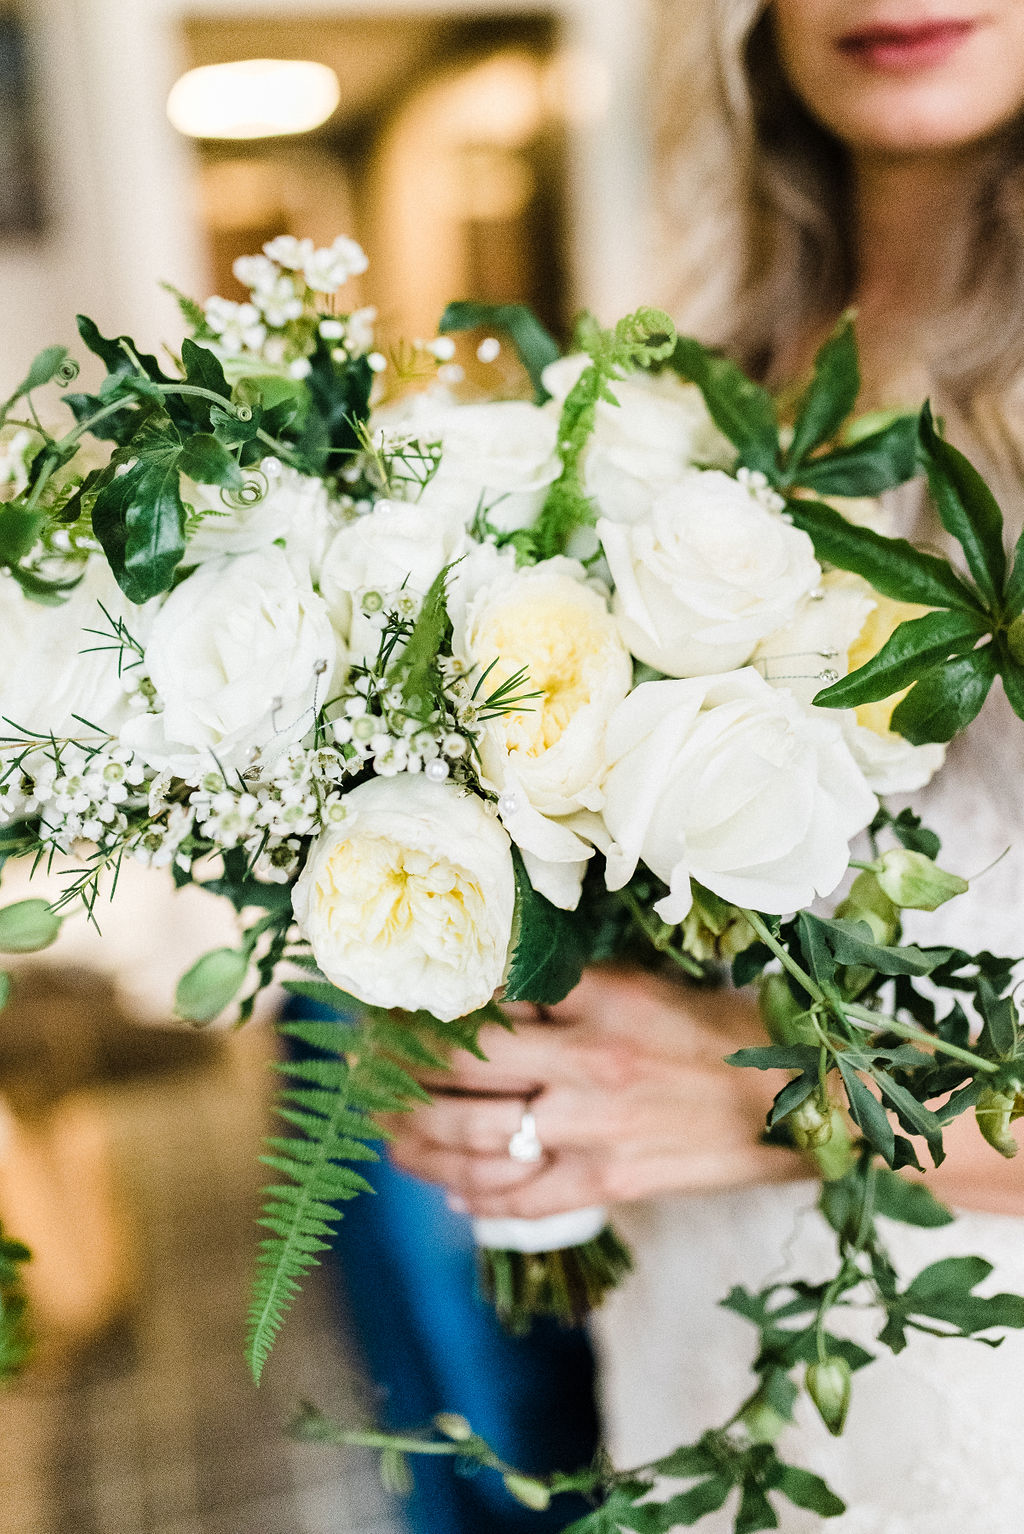 Brides bouquet with white roses, greenery and blue and white passion flowers - Pearl Weddings &amp; Events